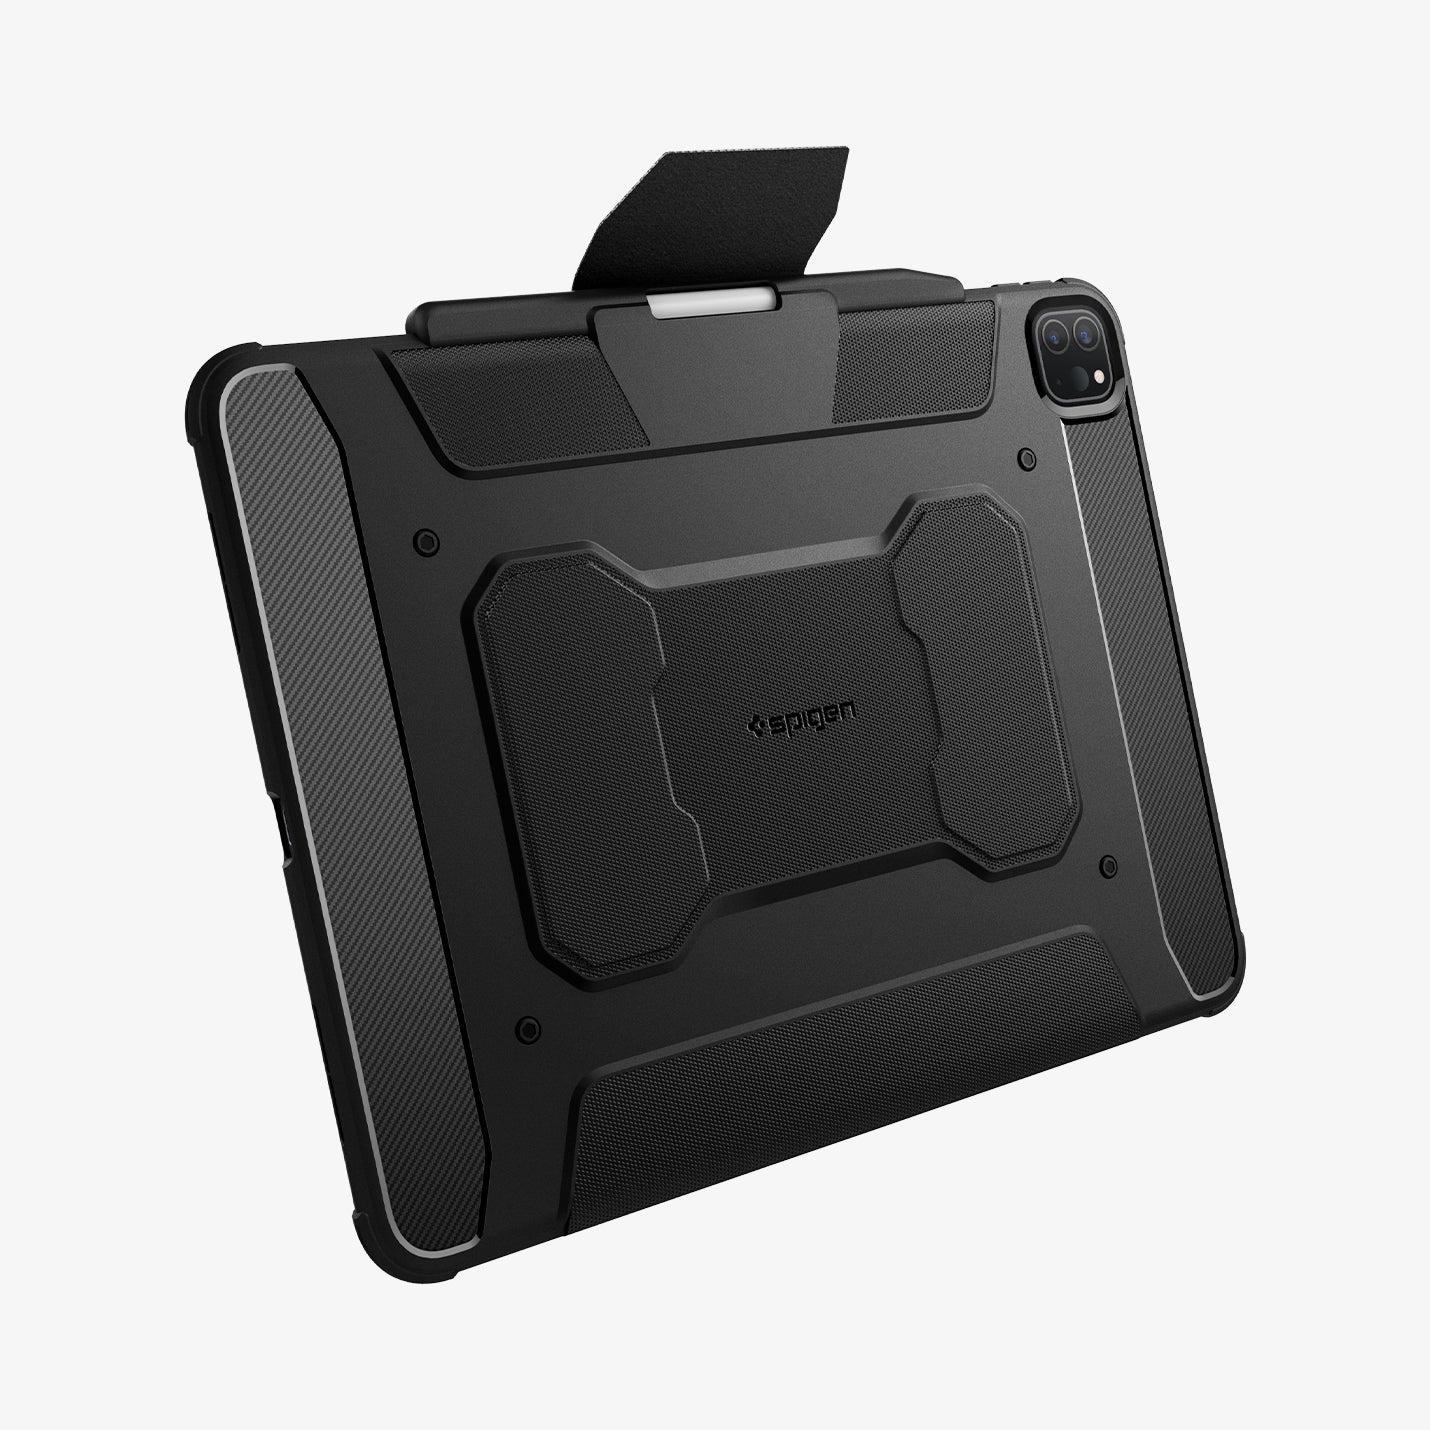 ACS07007 - iPad Pro 12.9-inch Case Rugged Armor Pro in Black showing the back and partial bottom with case lock partially lifted